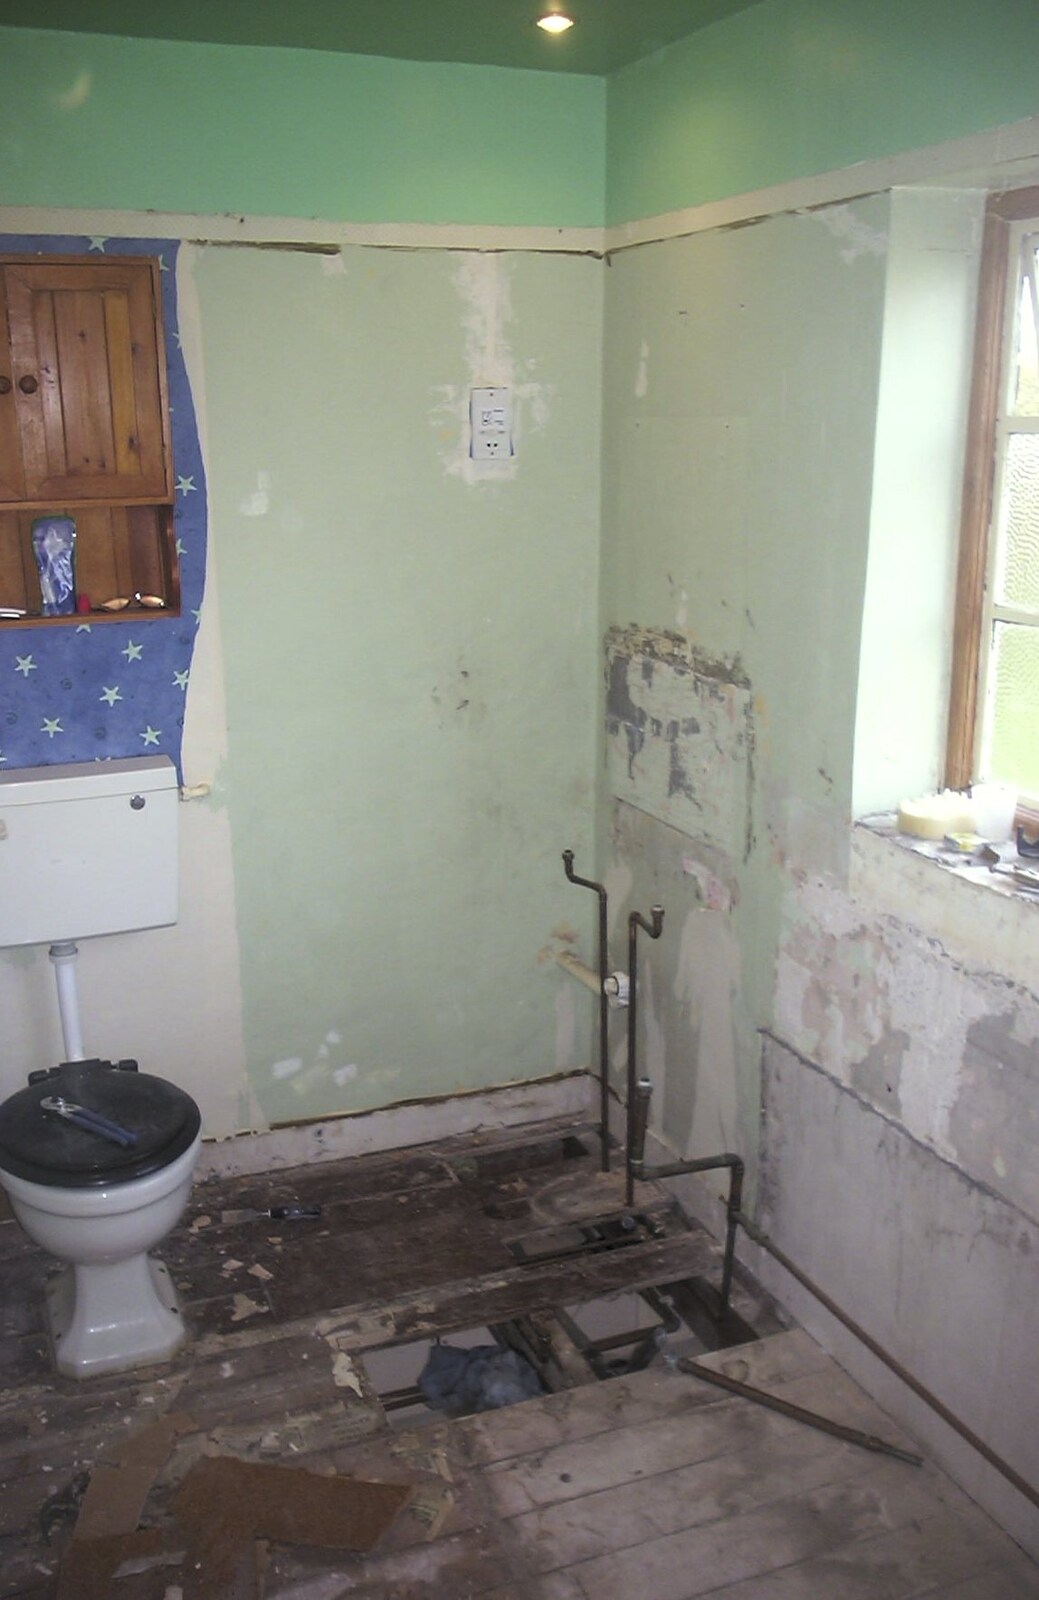 The old sink and bath have bene removed from Bathroom Rebuilding, Brome, Suffolk - 1st February 2002